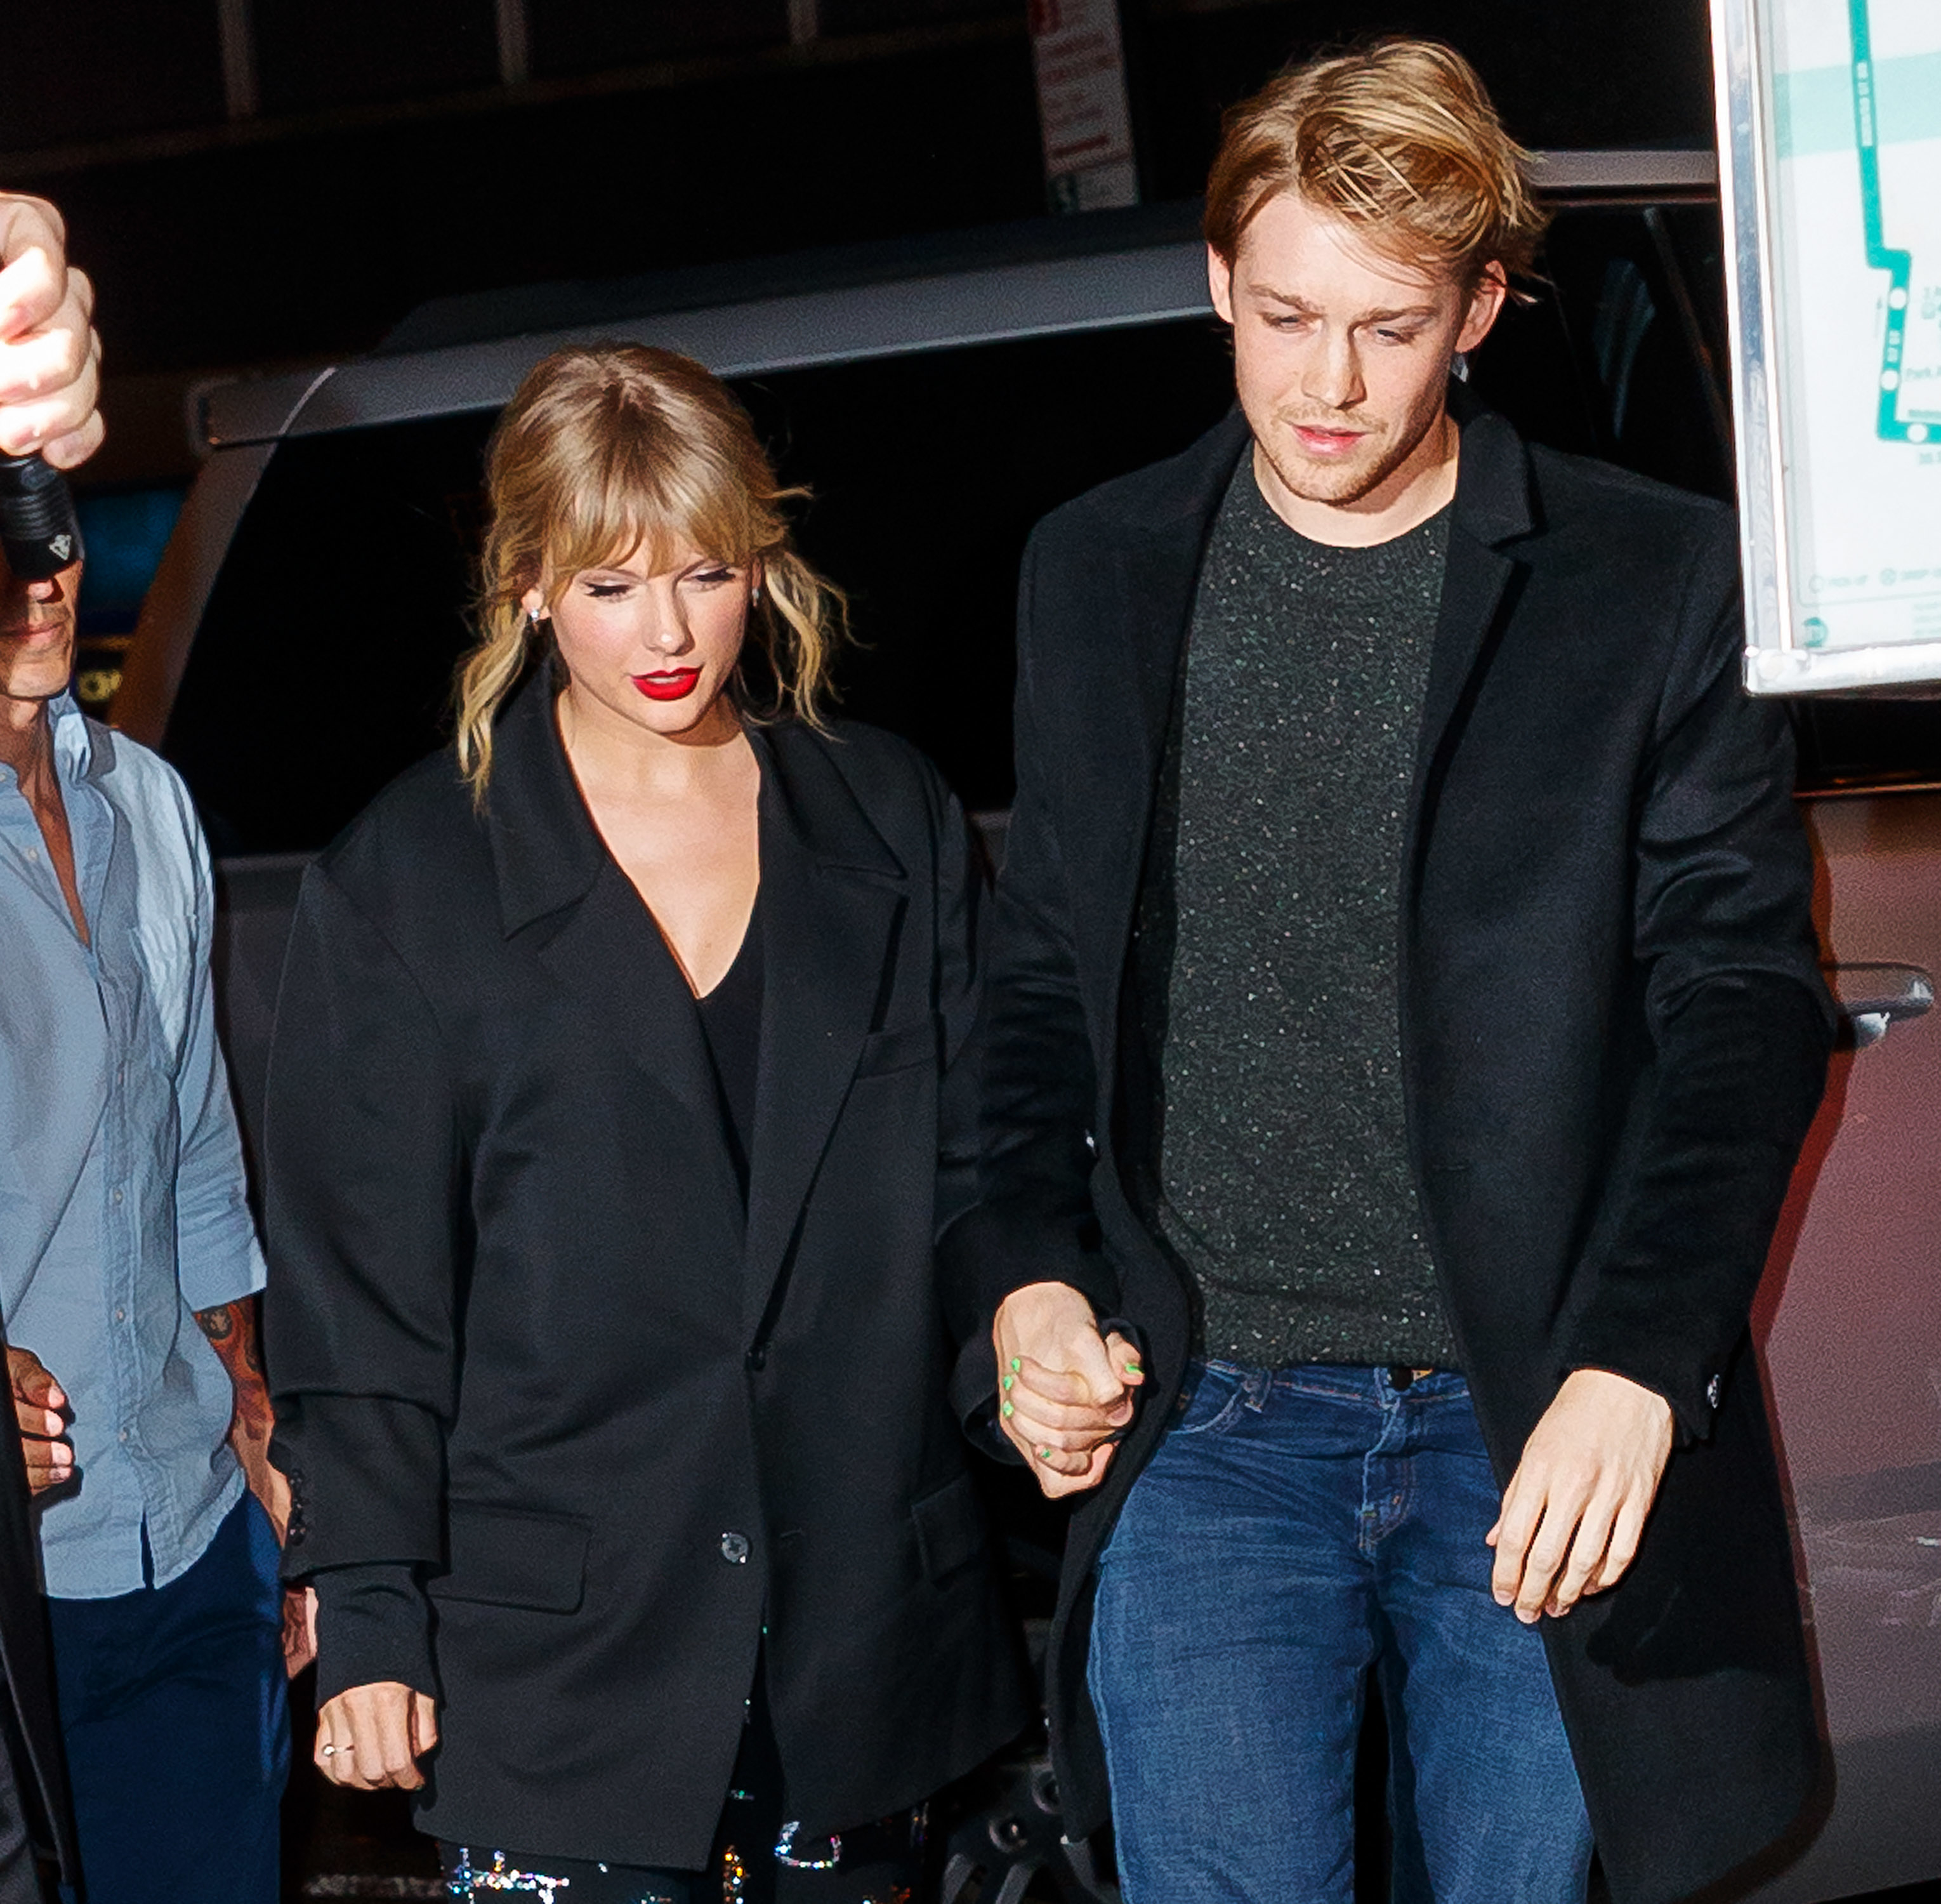 Taylor and Joe holding hands